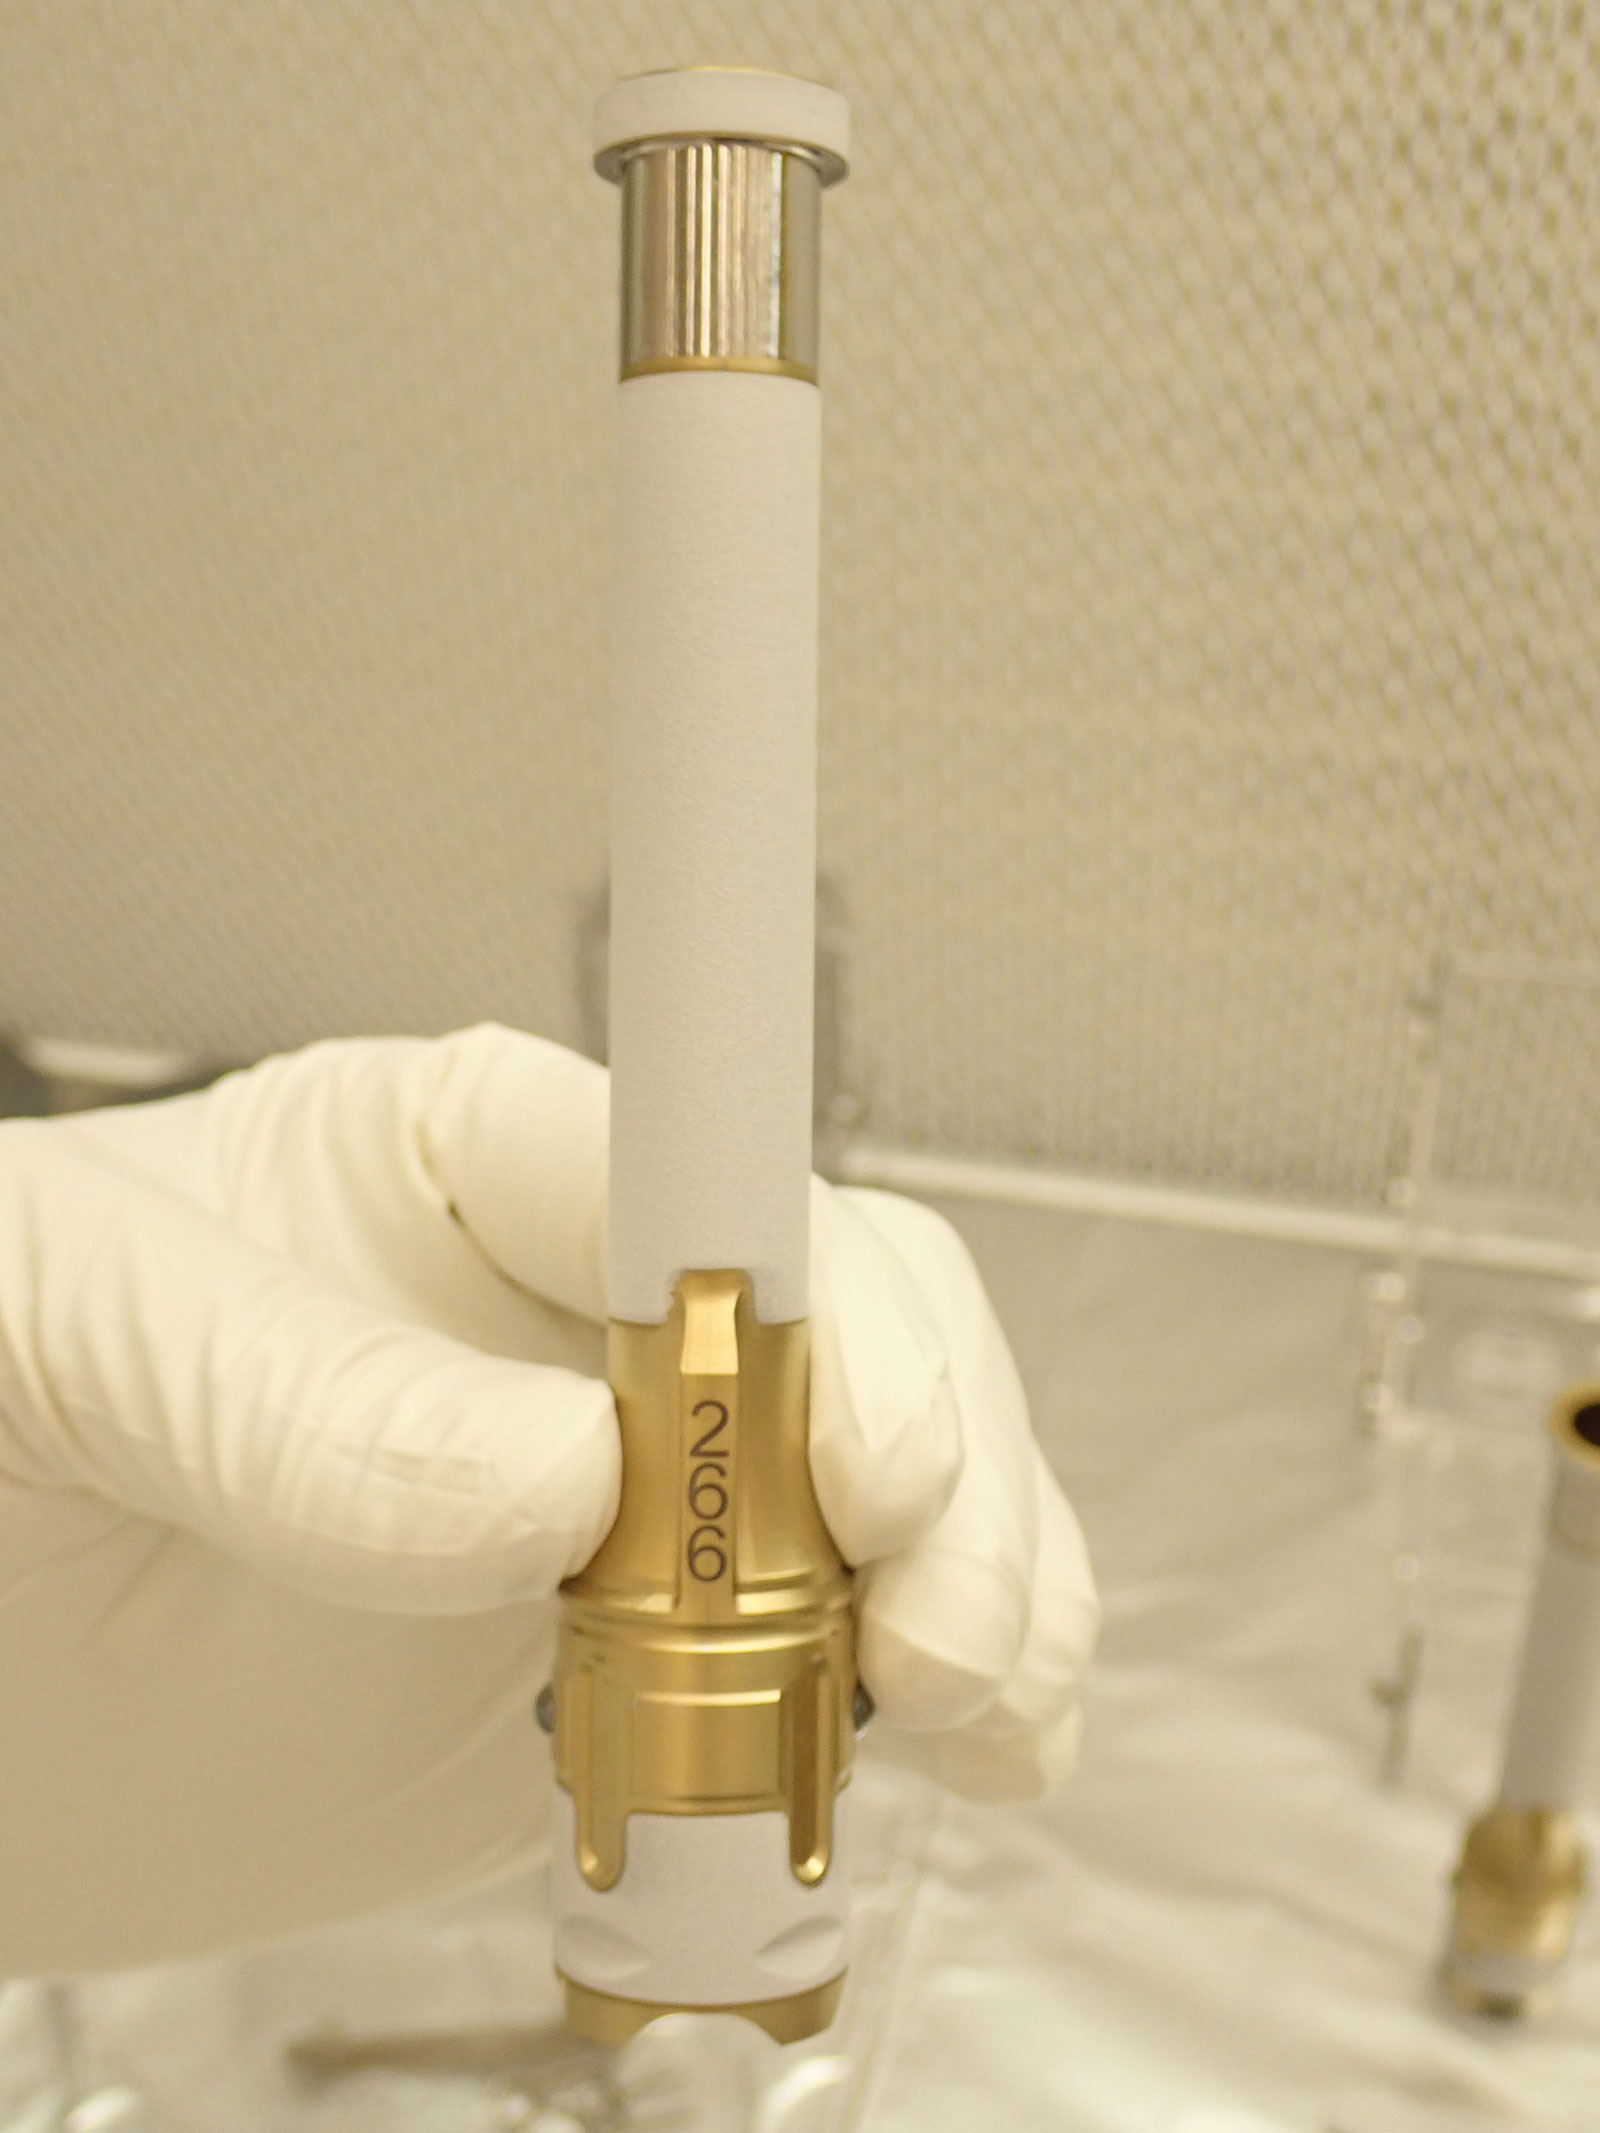 Sample tube number 266 was used to collect the first sample of Martian rock by NASA’s Perseverance rover. The laser-etched serial number helps science team identify the tubes and their contents.